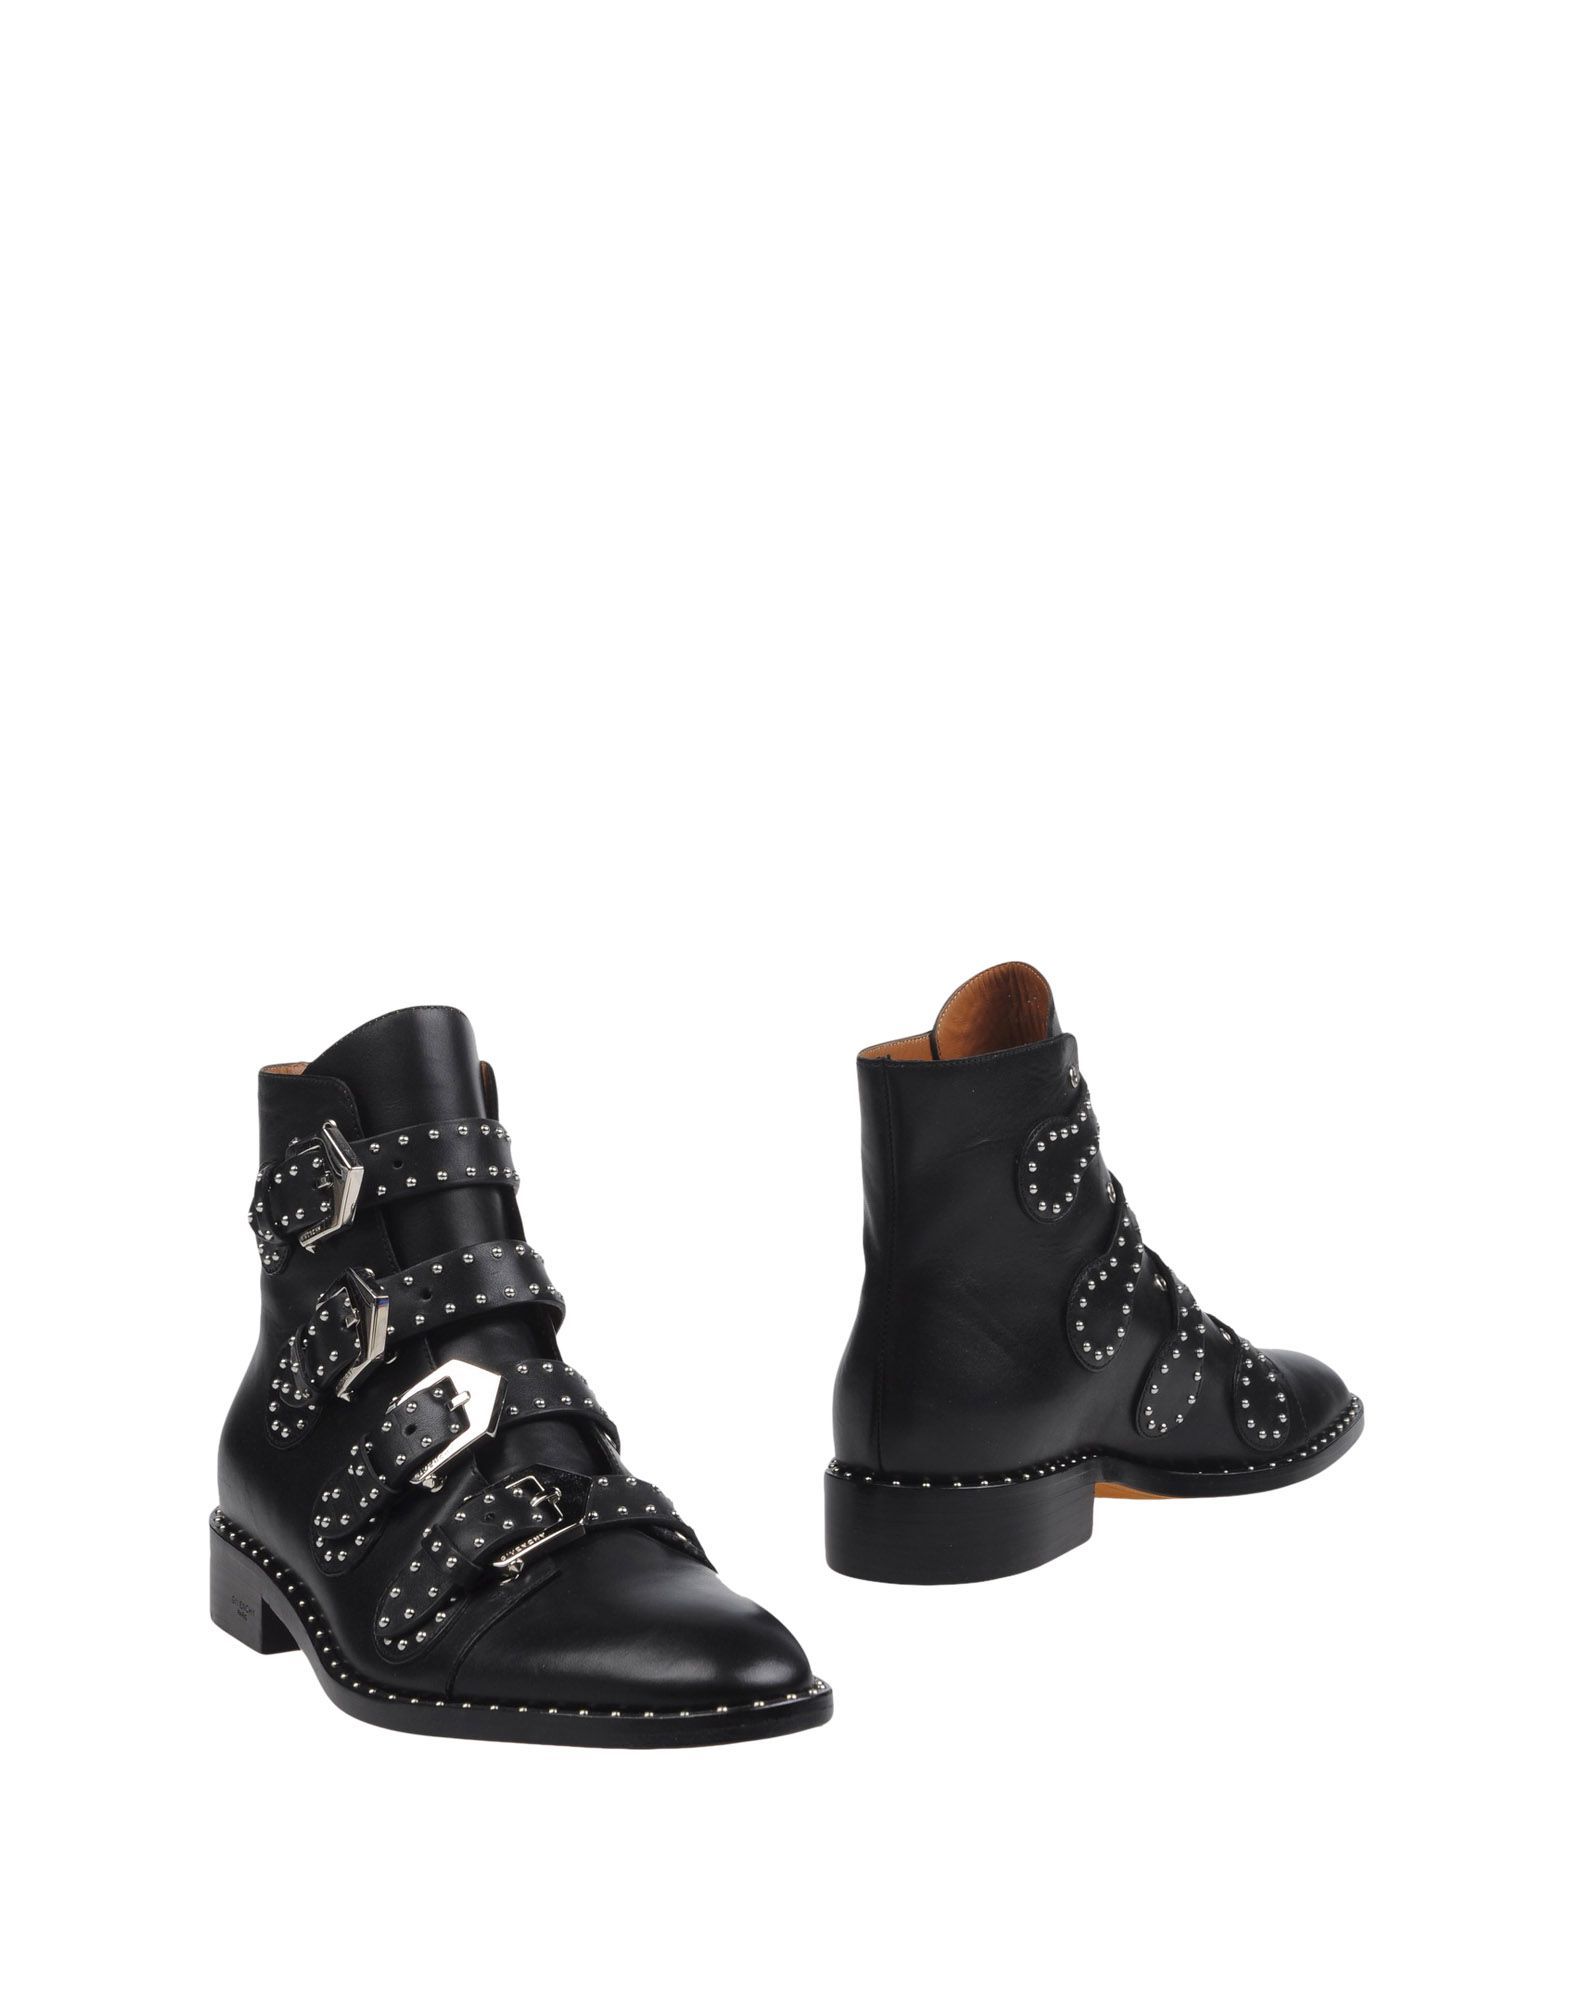 GIVENCHY Ankle boots | YOOX (US)